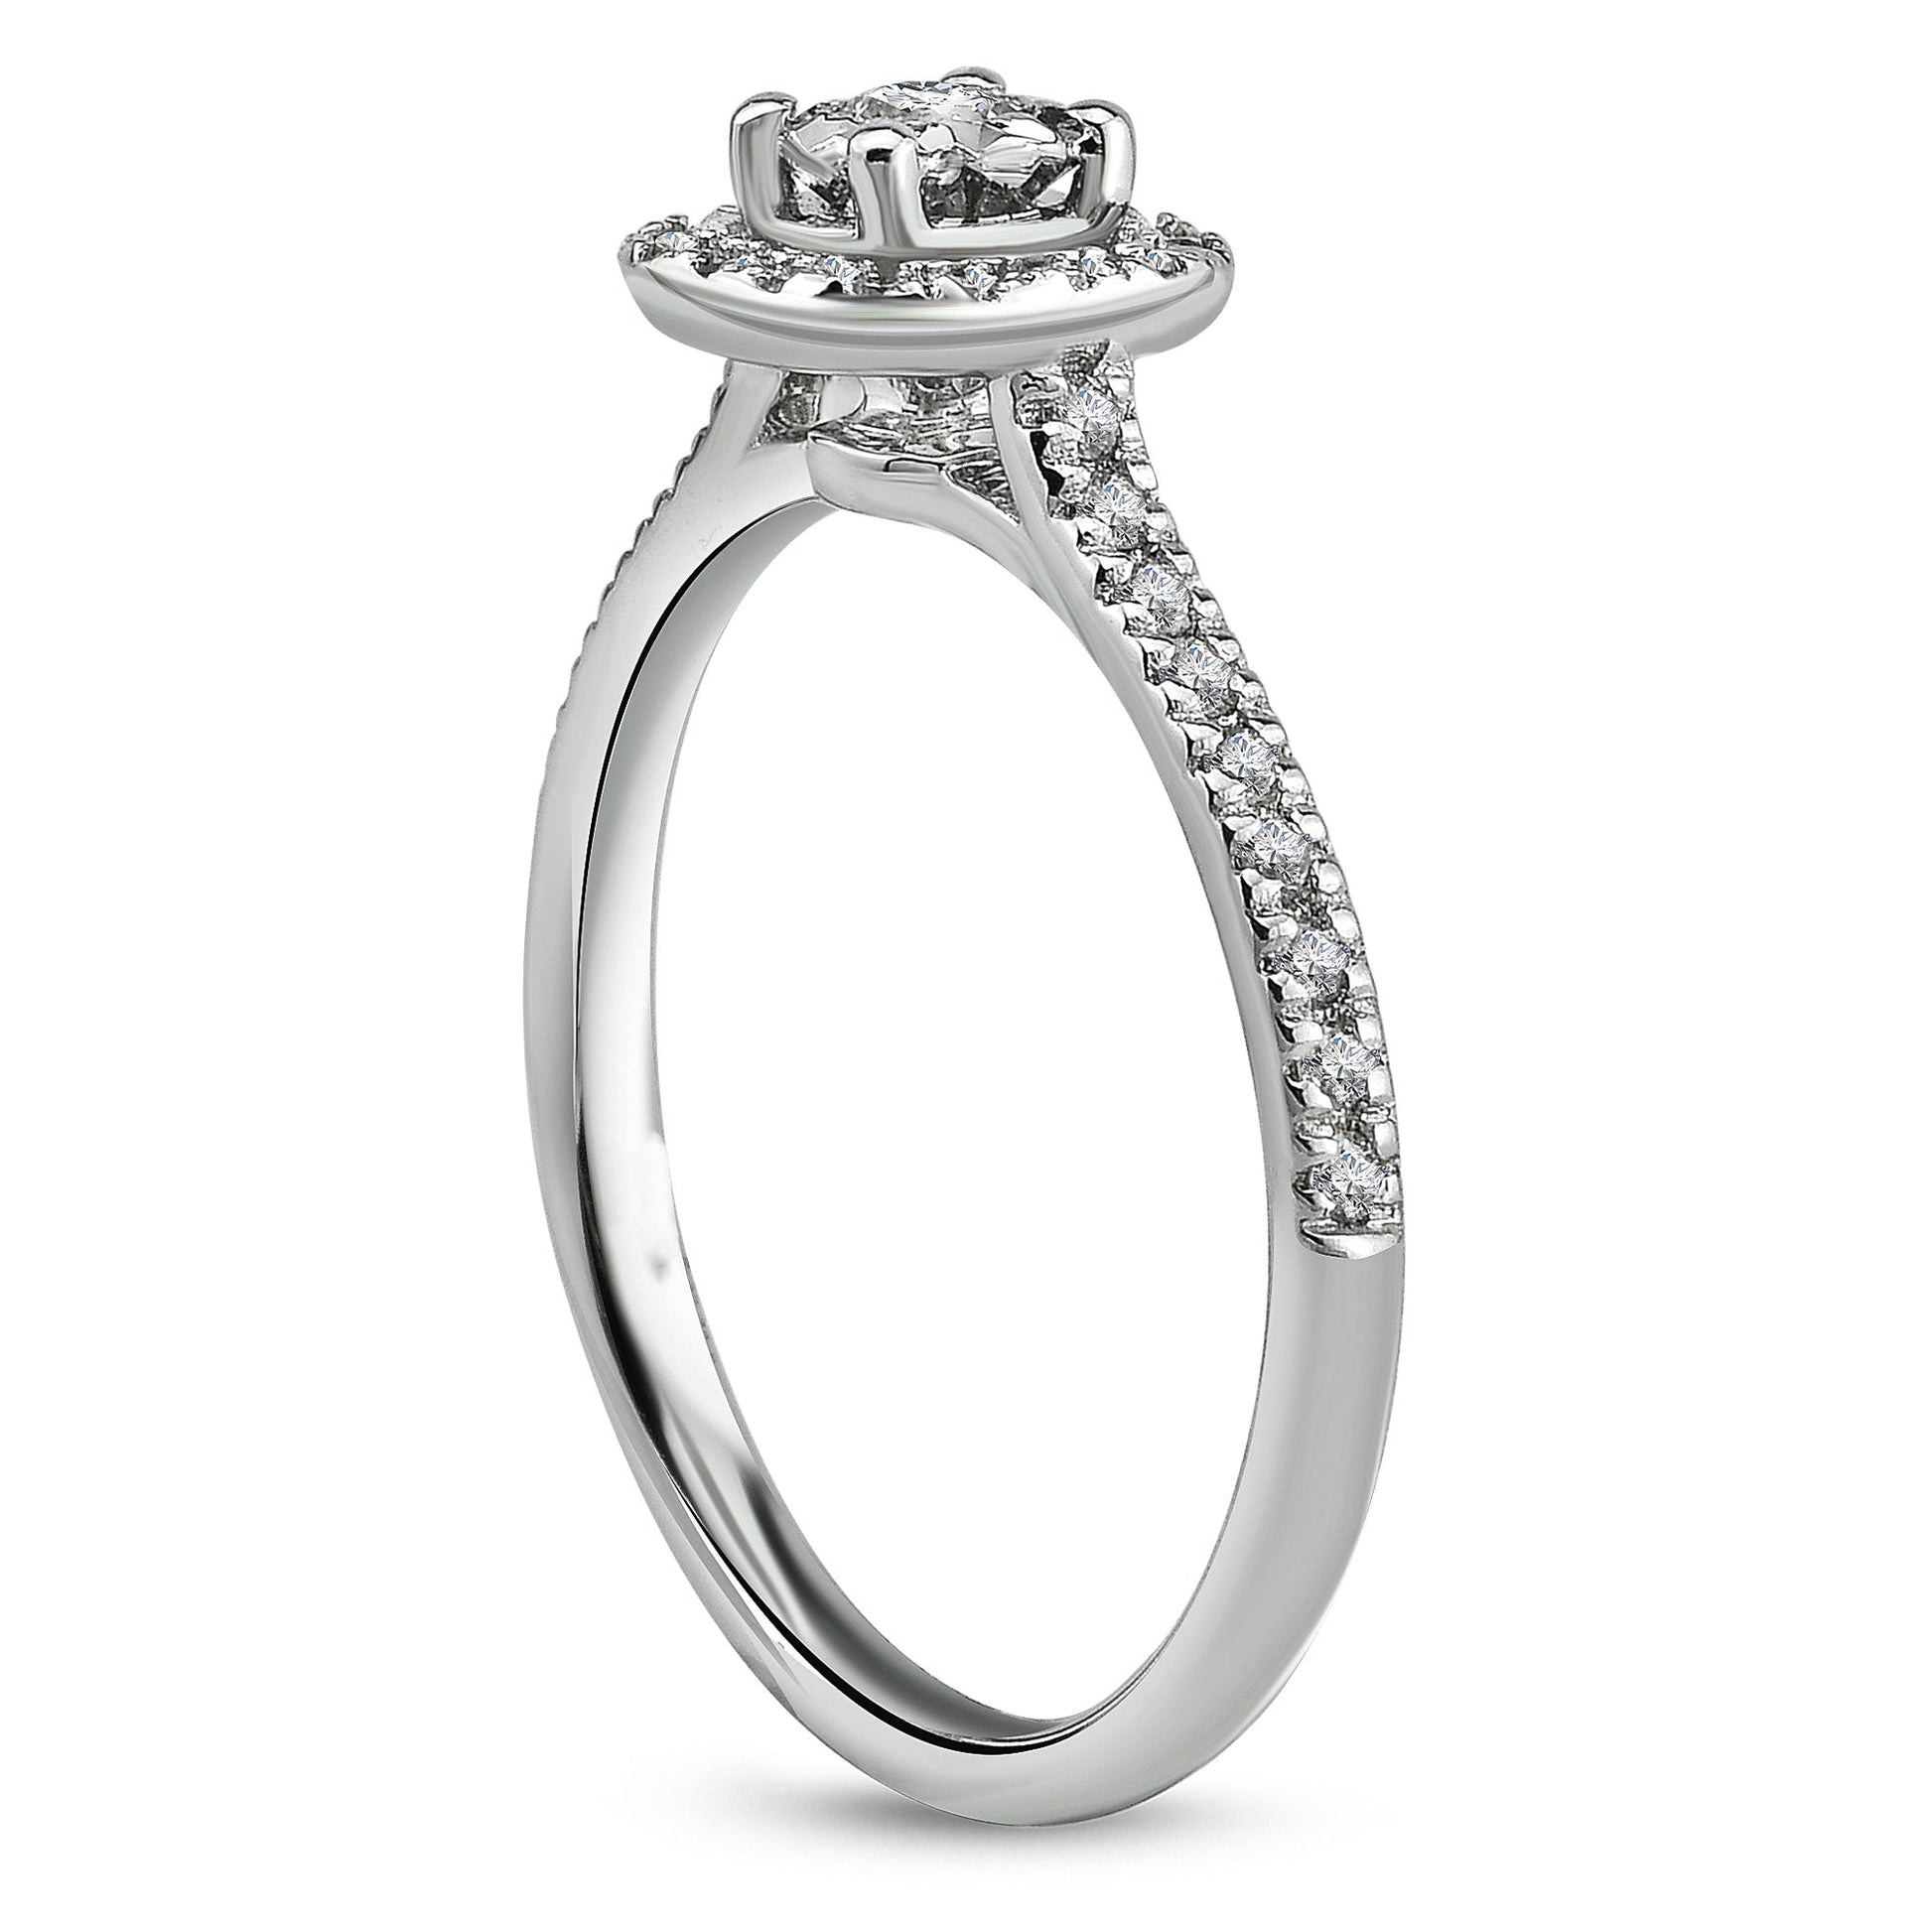 Elyssa Jewelry Halo Diamond 14K Ring Micropave Round 0.23ct Engagement Gold - ring Zengoda Shop online from Artisan